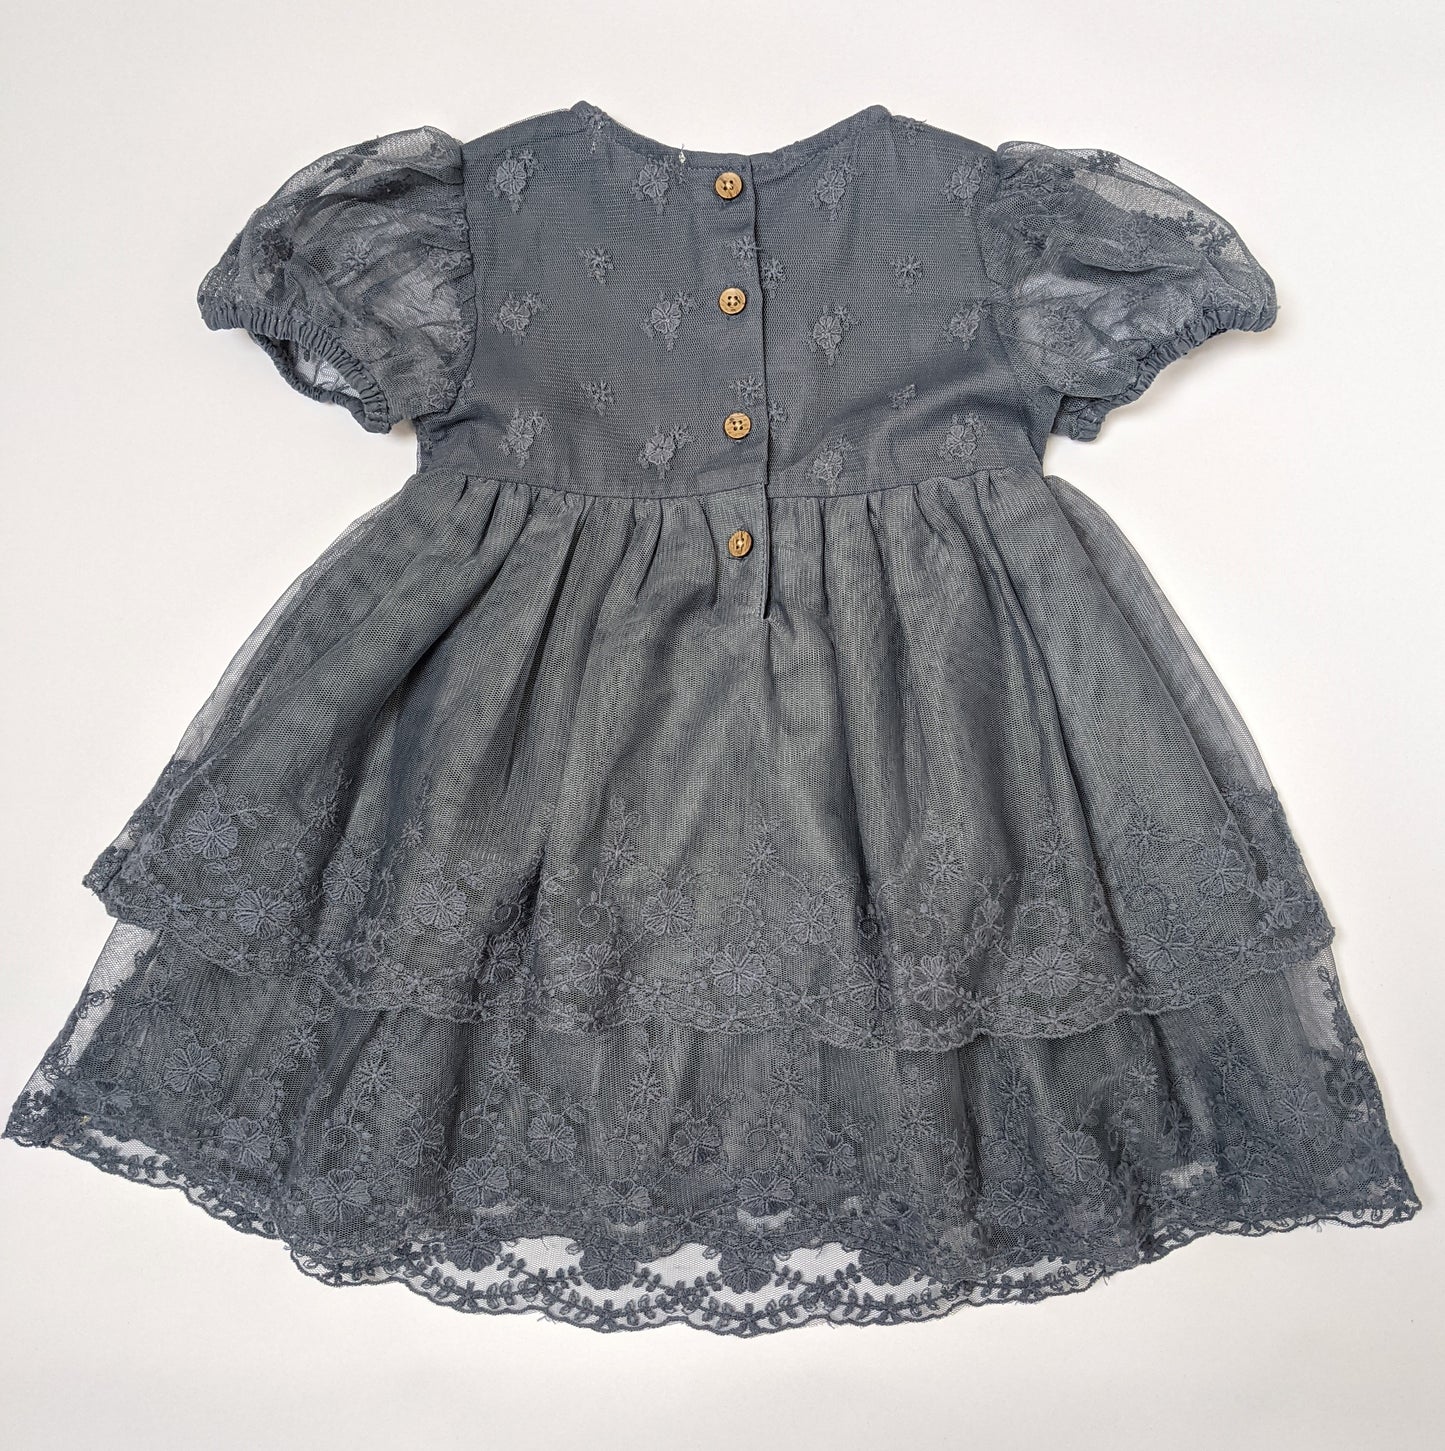 Back of blue lace dress showing wood imitation buttons